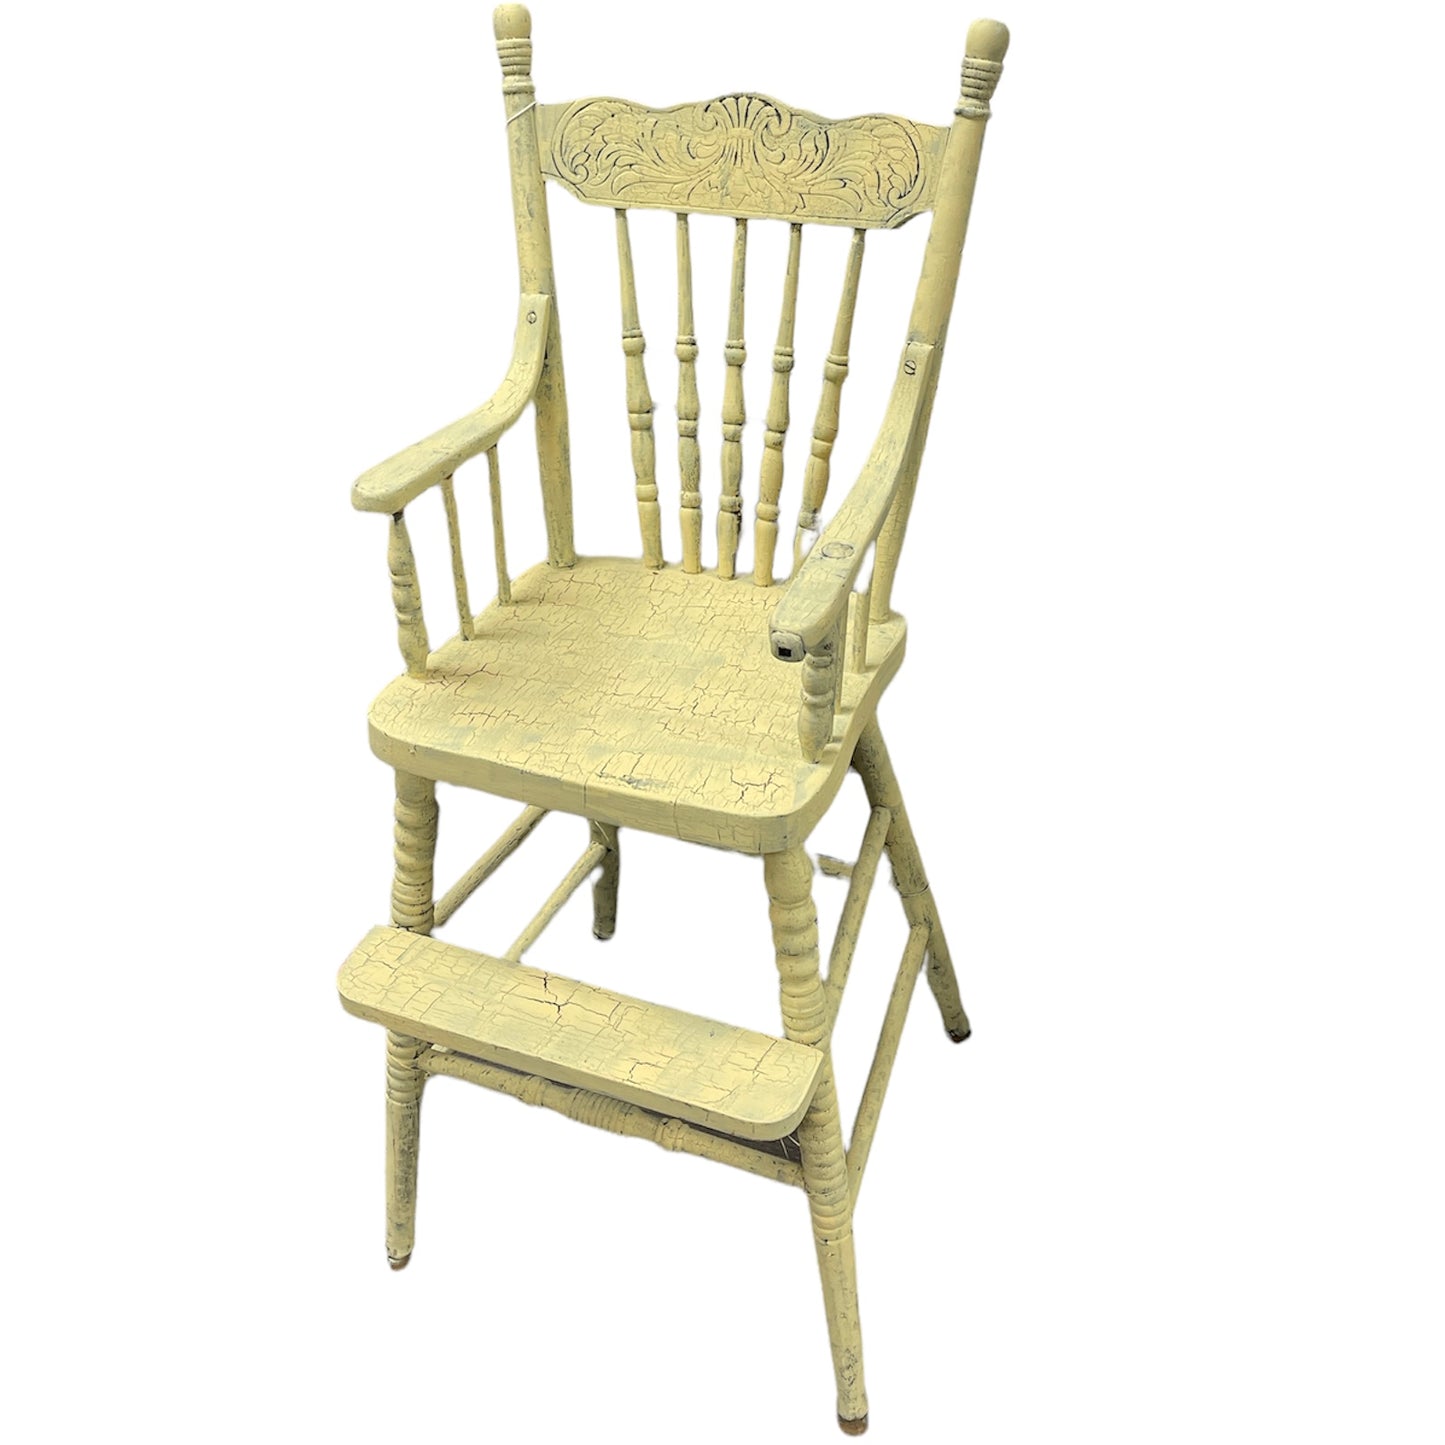 Yellow Crackle Painted High Chair